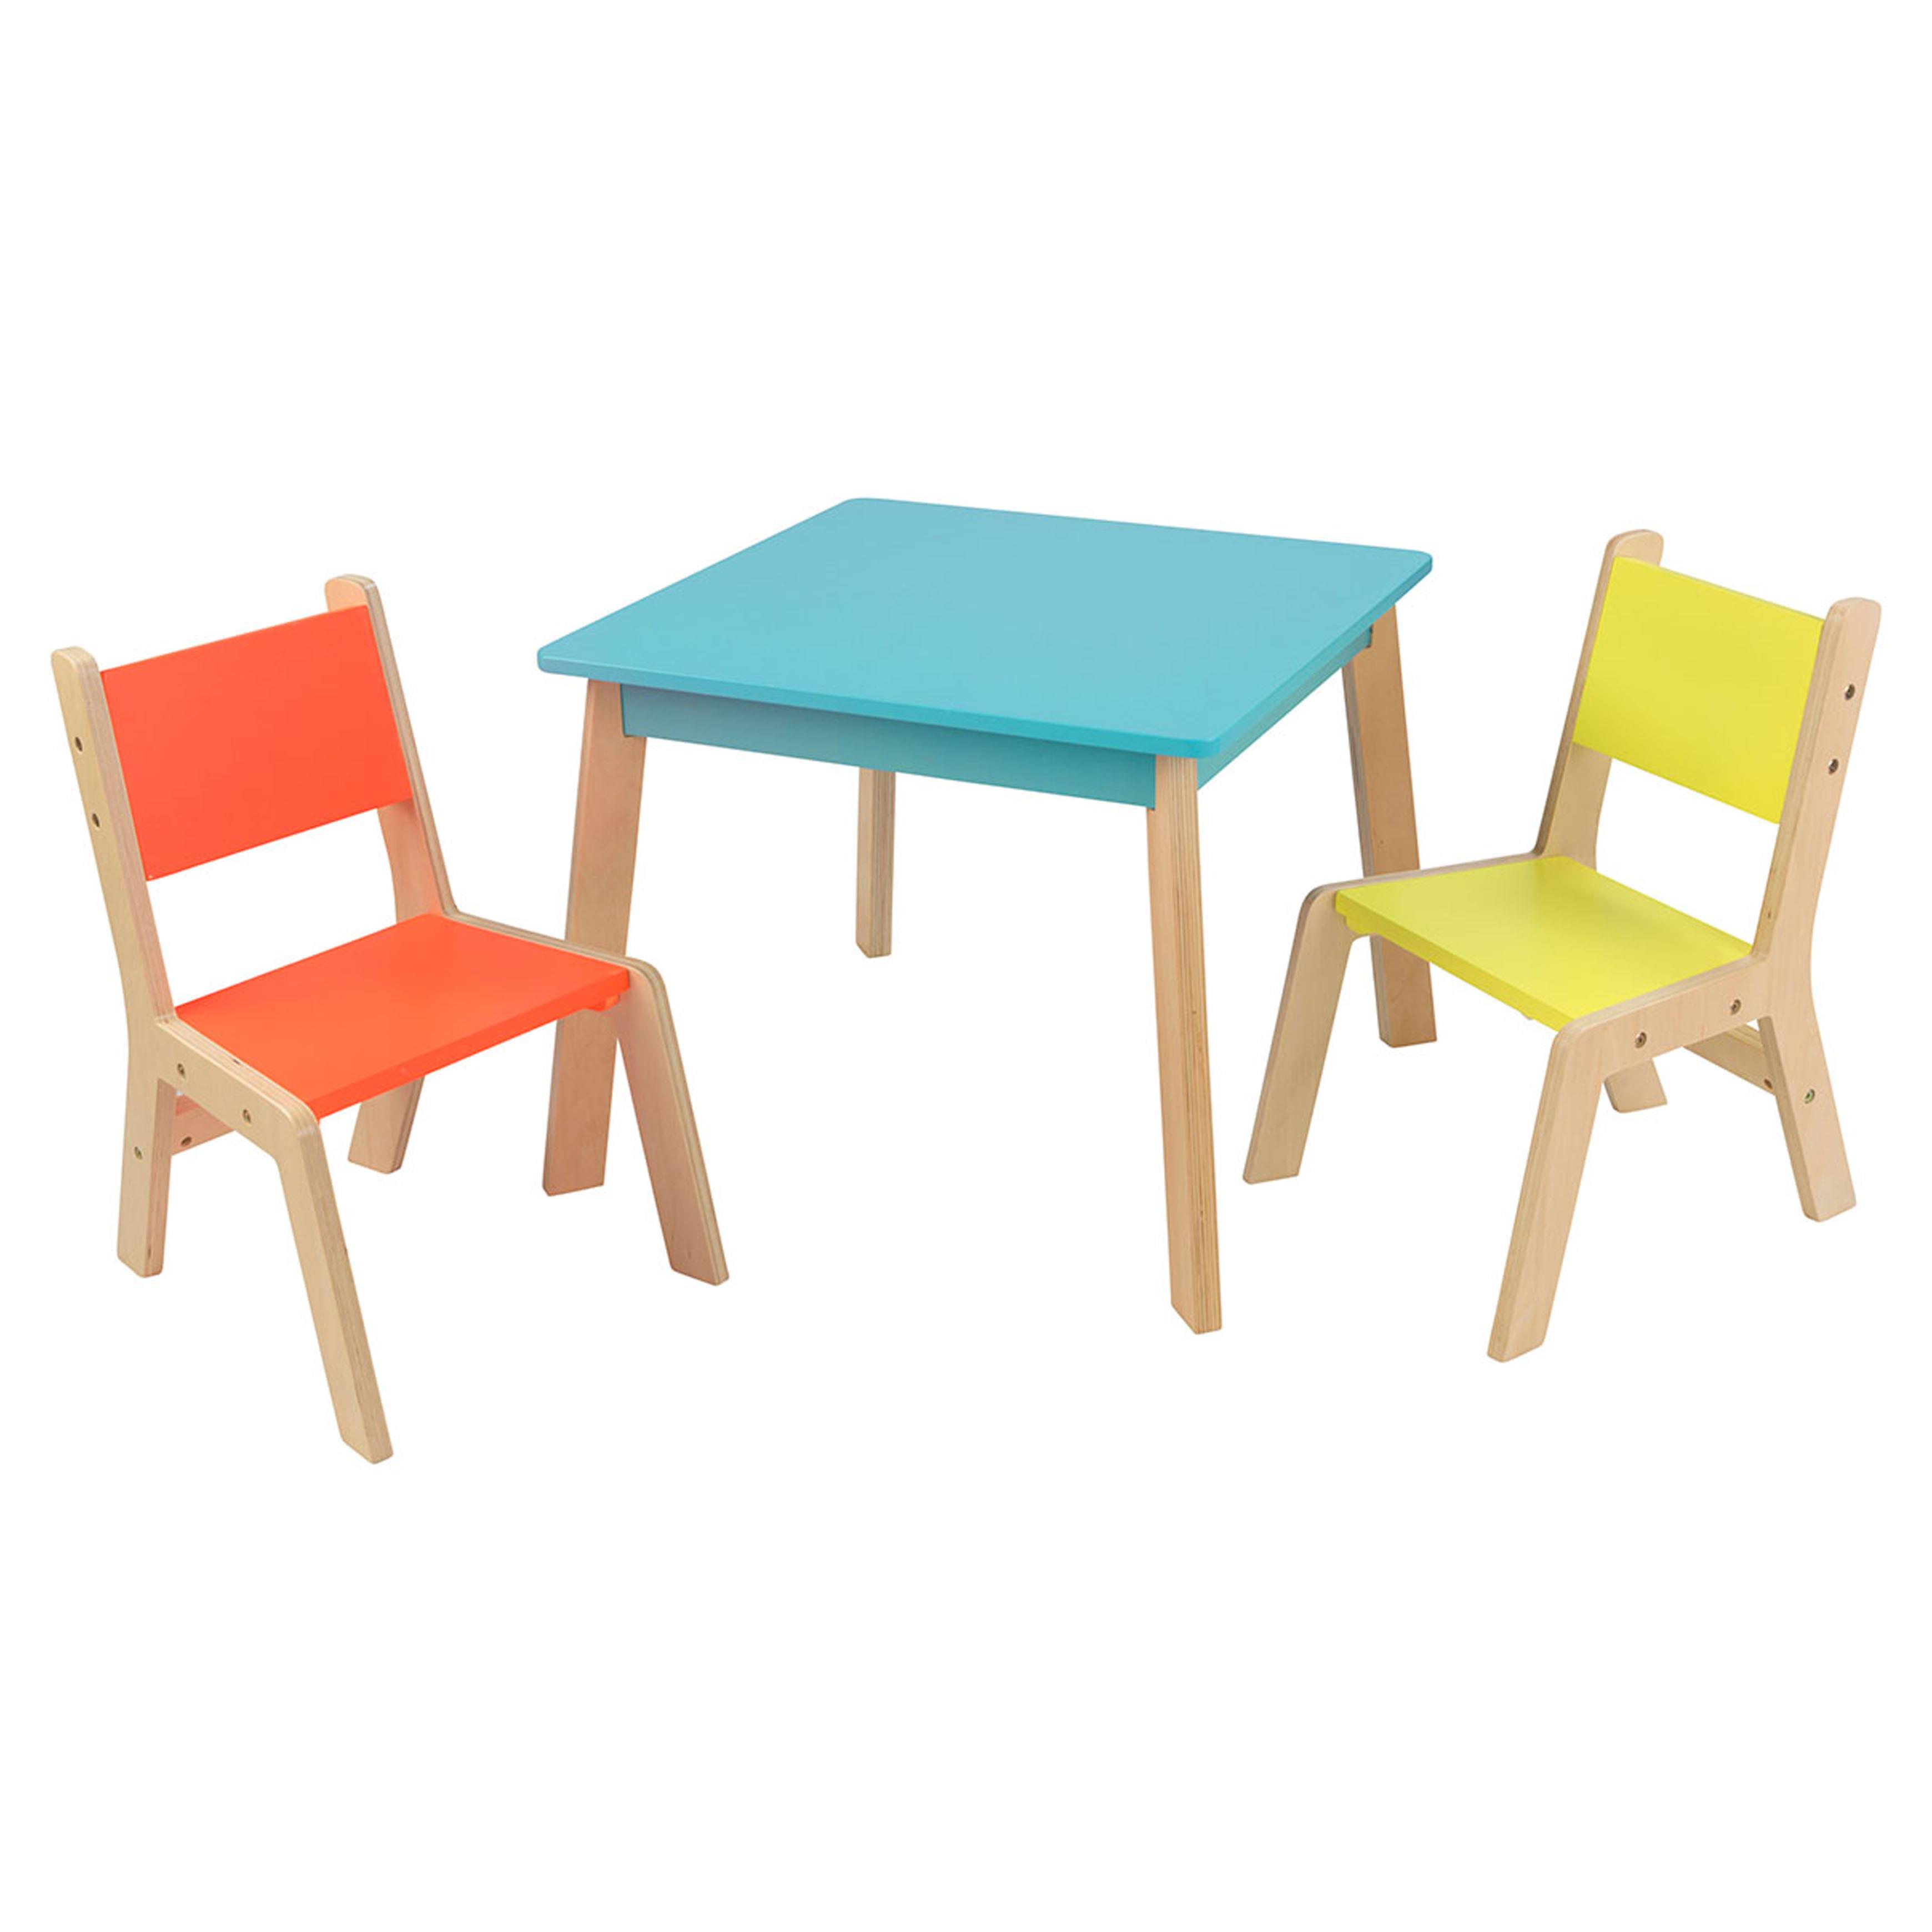 Chic $50-$100 wooden toddler table and chairs